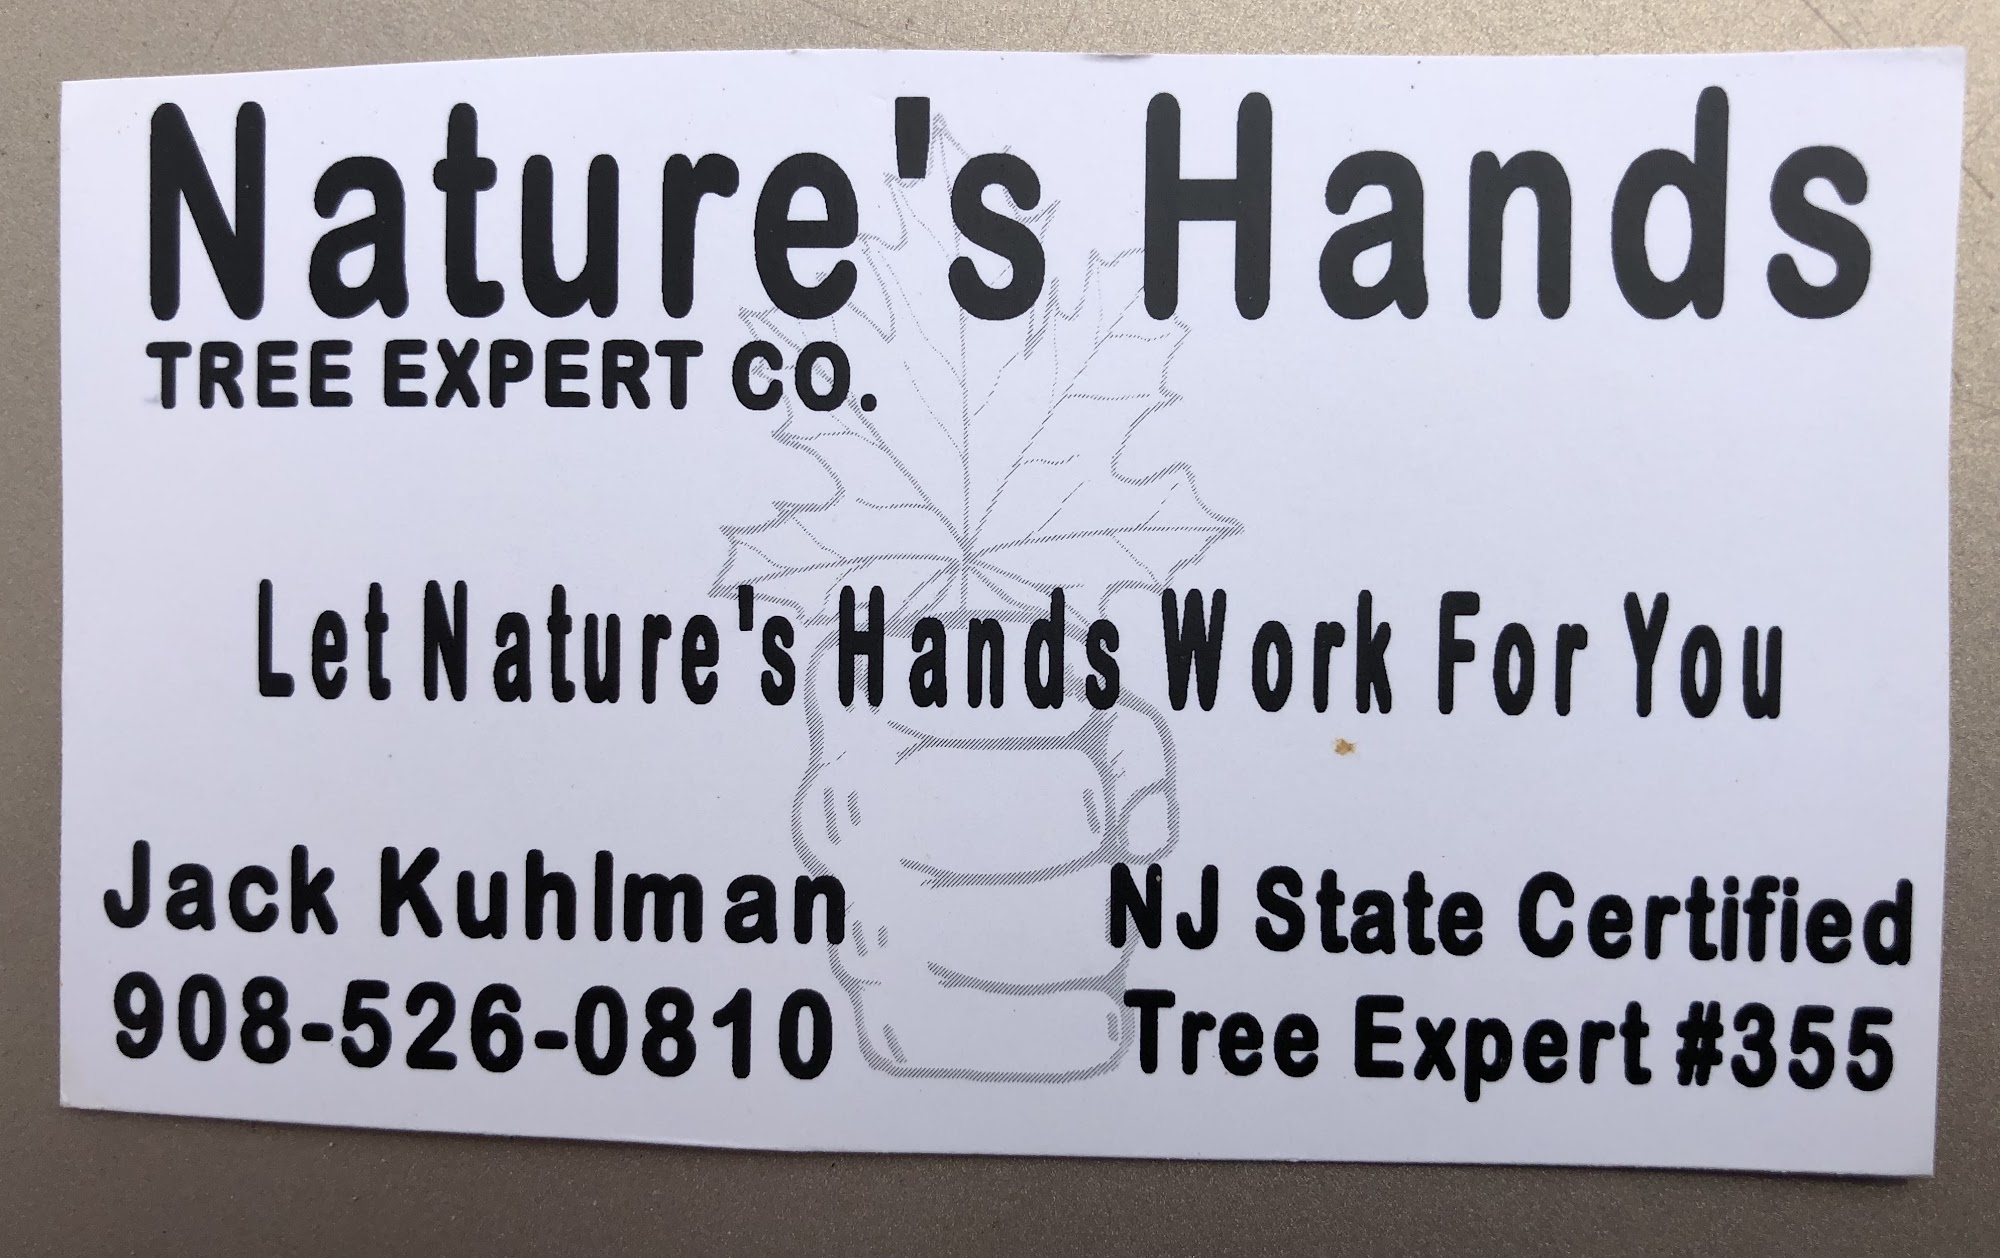 Nature’s Hands Tree Experts